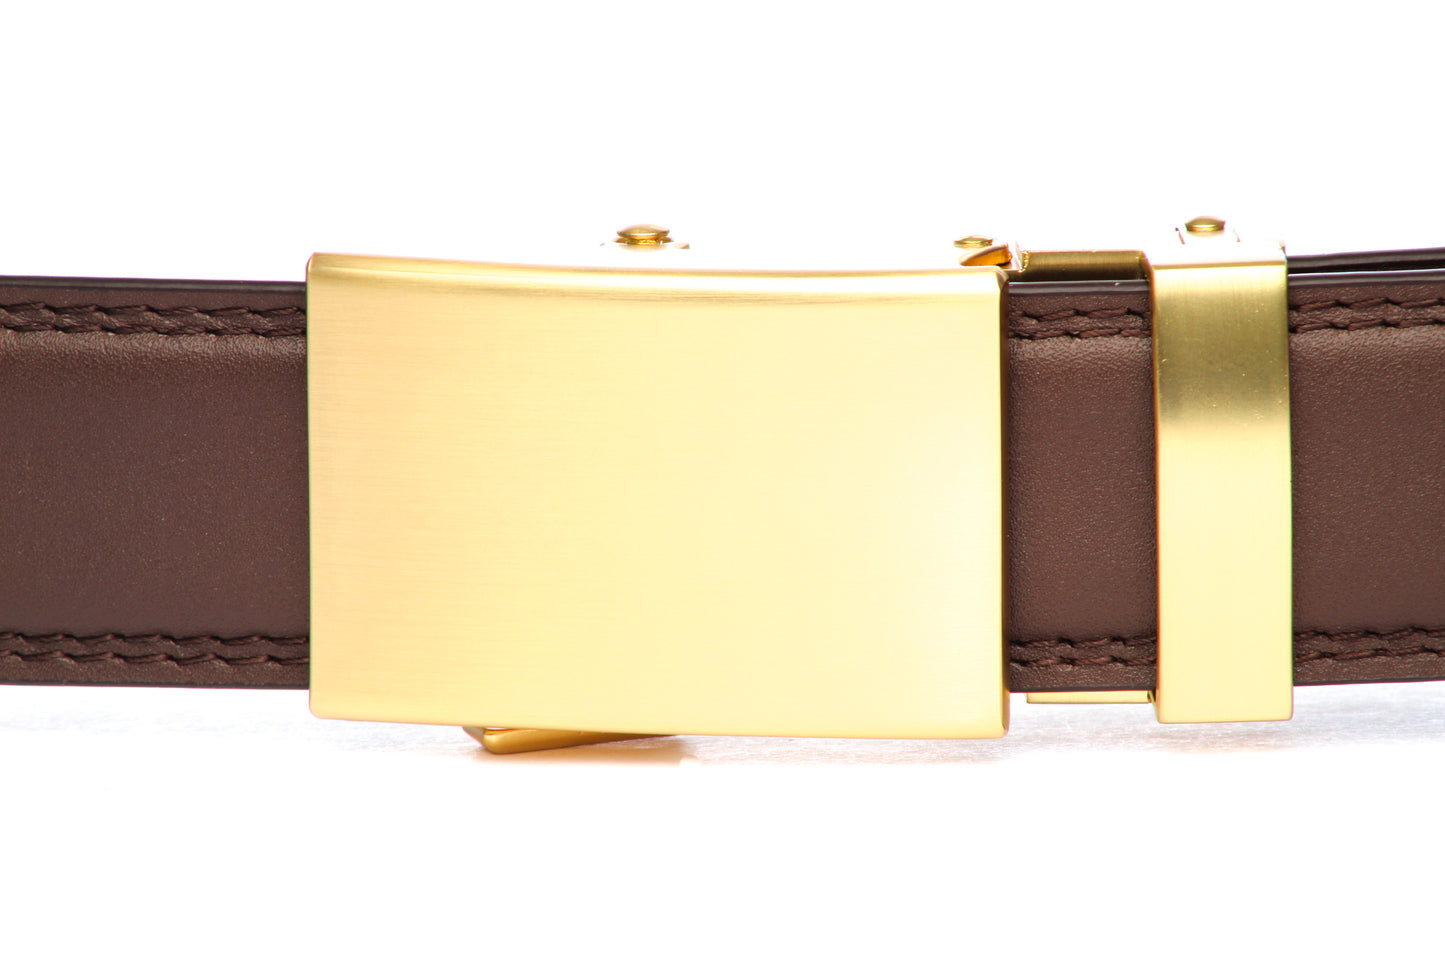 Men's classic ratchet belt buckle in matte gold with a 1.25-inch width, front view.